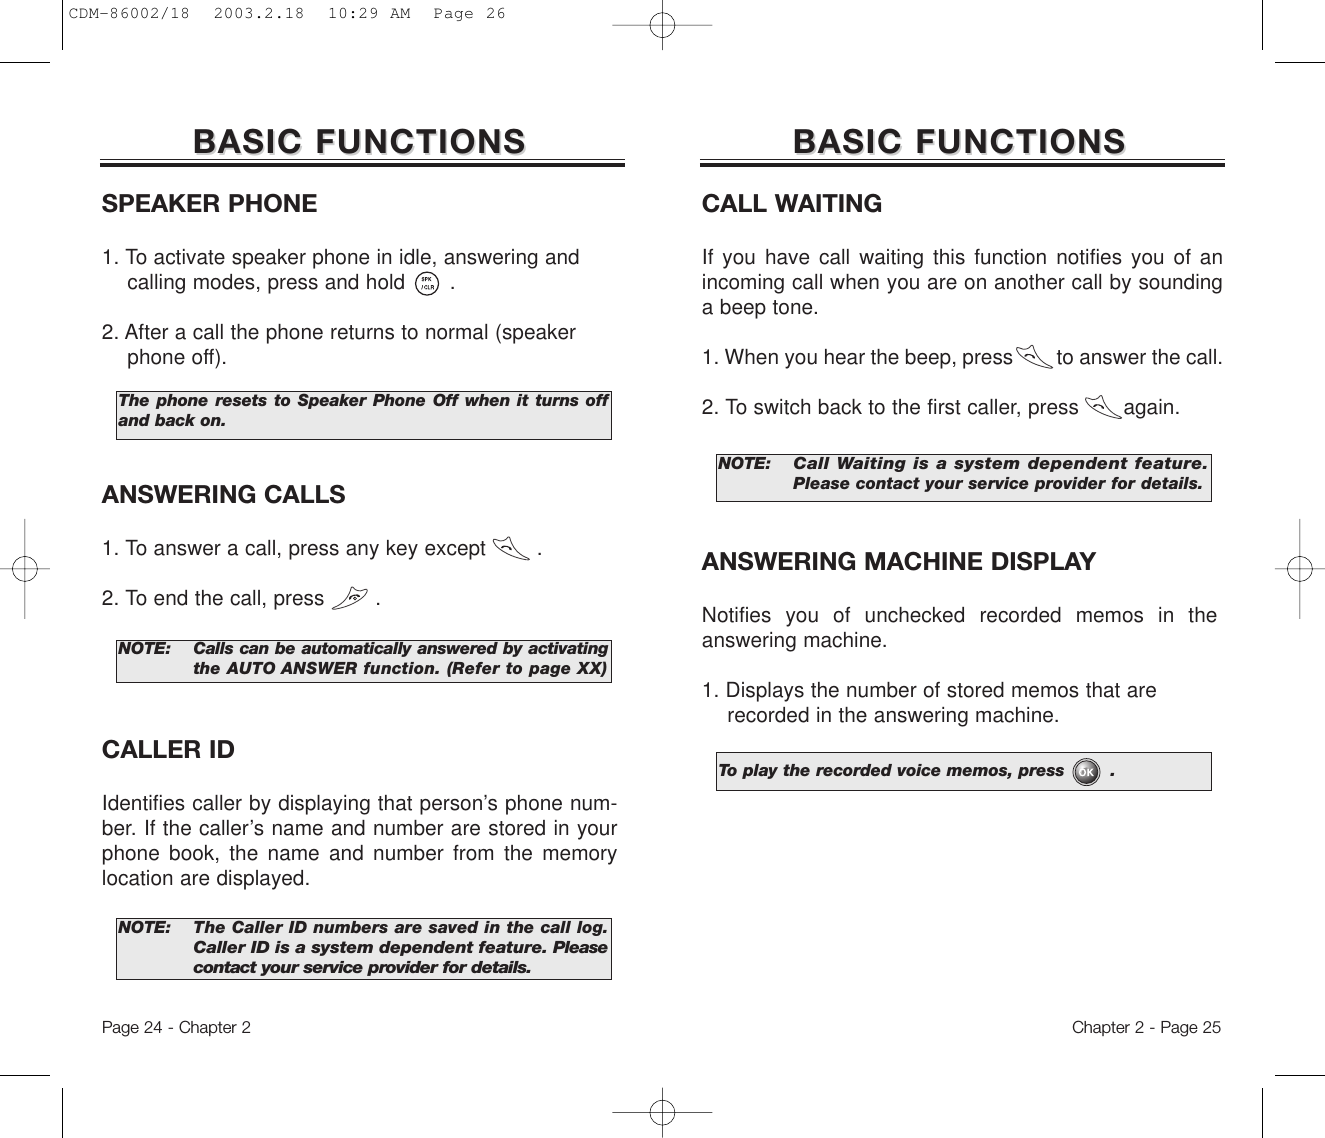 The phone resets to Speaker Phone Off when it turns offand back on.Chapter 2 - Page 25BASIC FUNCTIONSBASIC FUNCTIONSSPEAKER PHONE1. To activate speaker phone in idle, answering and calling modes, press and hold .2. After a call the phone returns to normal (speaker phone off).Page 24 - Chapter 2ANSWERING CALLS1. To answer a call, press any key except        .2. To end the call, press        .NOTE: Calls can be automatically answered by activatingthe AUTO ANSWER function. (Refer to page XX)NOTE: The Caller ID numbers are saved in the call log.Caller ID is a system dependent feature. Pleasecontact your service provider for details.CALLER IDIdentifies caller by displaying that person’s phone num-ber. If the caller’s name and number are stored in yourphone book, the name and number from the memorylocation are displayed.BASIC FUNCTIONSBASIC FUNCTIONSCALL WAITINGIf you have call waiting this function notifies you of anincoming call when you are on another call by soundinga beep tone.1. When you hear the beep, press        to answer the call.2. To switch back to the first caller, press       again.NOTE:Call Waiting is a system dependent feature.Pleasecontact your service provider for details.ANSWERING MACHINE DISPLAYNotifies you of unchecked recorded memos in theanswering machine.1. Displays the number of stored memos that are recorded in the answering machine.To play the recorded voice memos, press        .CDM-86002/18  2003.2.18  10:29 AM  Page 26